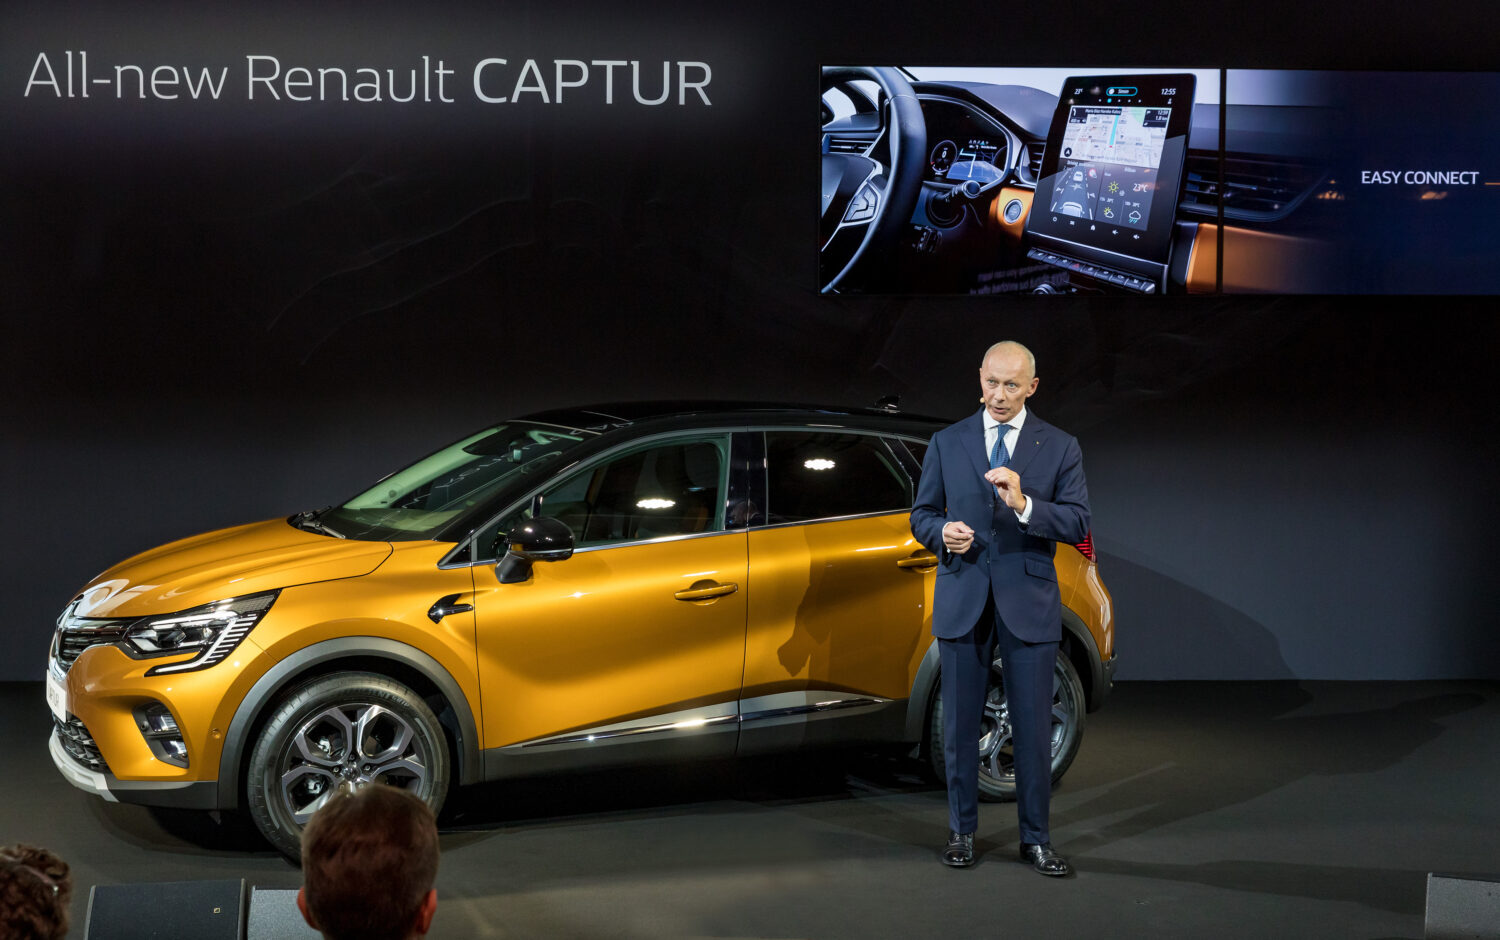 2019 - The All-New Renault CAPTUR presented At the Frankfurt Motor Show